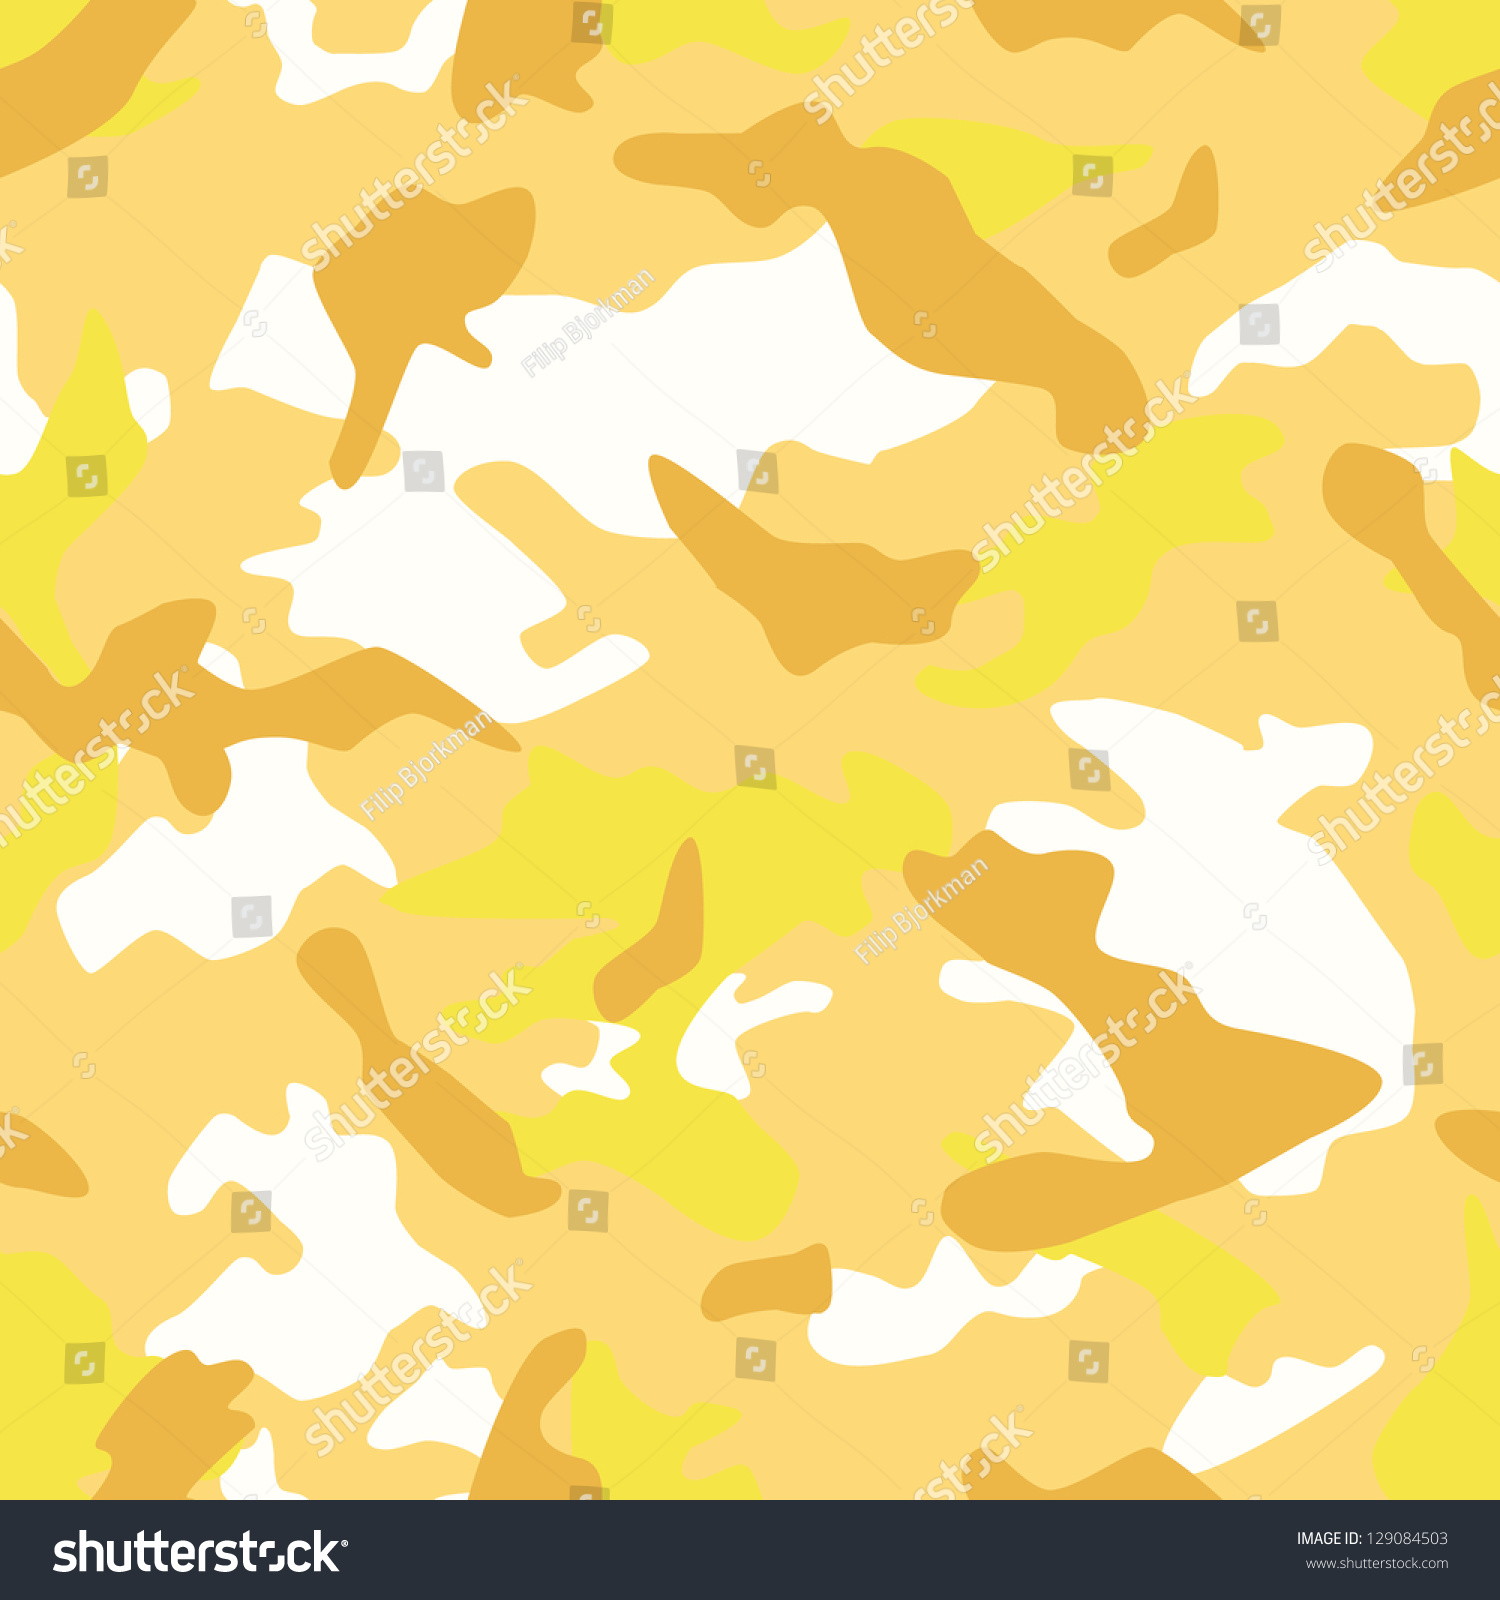 Seamless Vector Square Camouflage Series In The Yellow Scheme ...